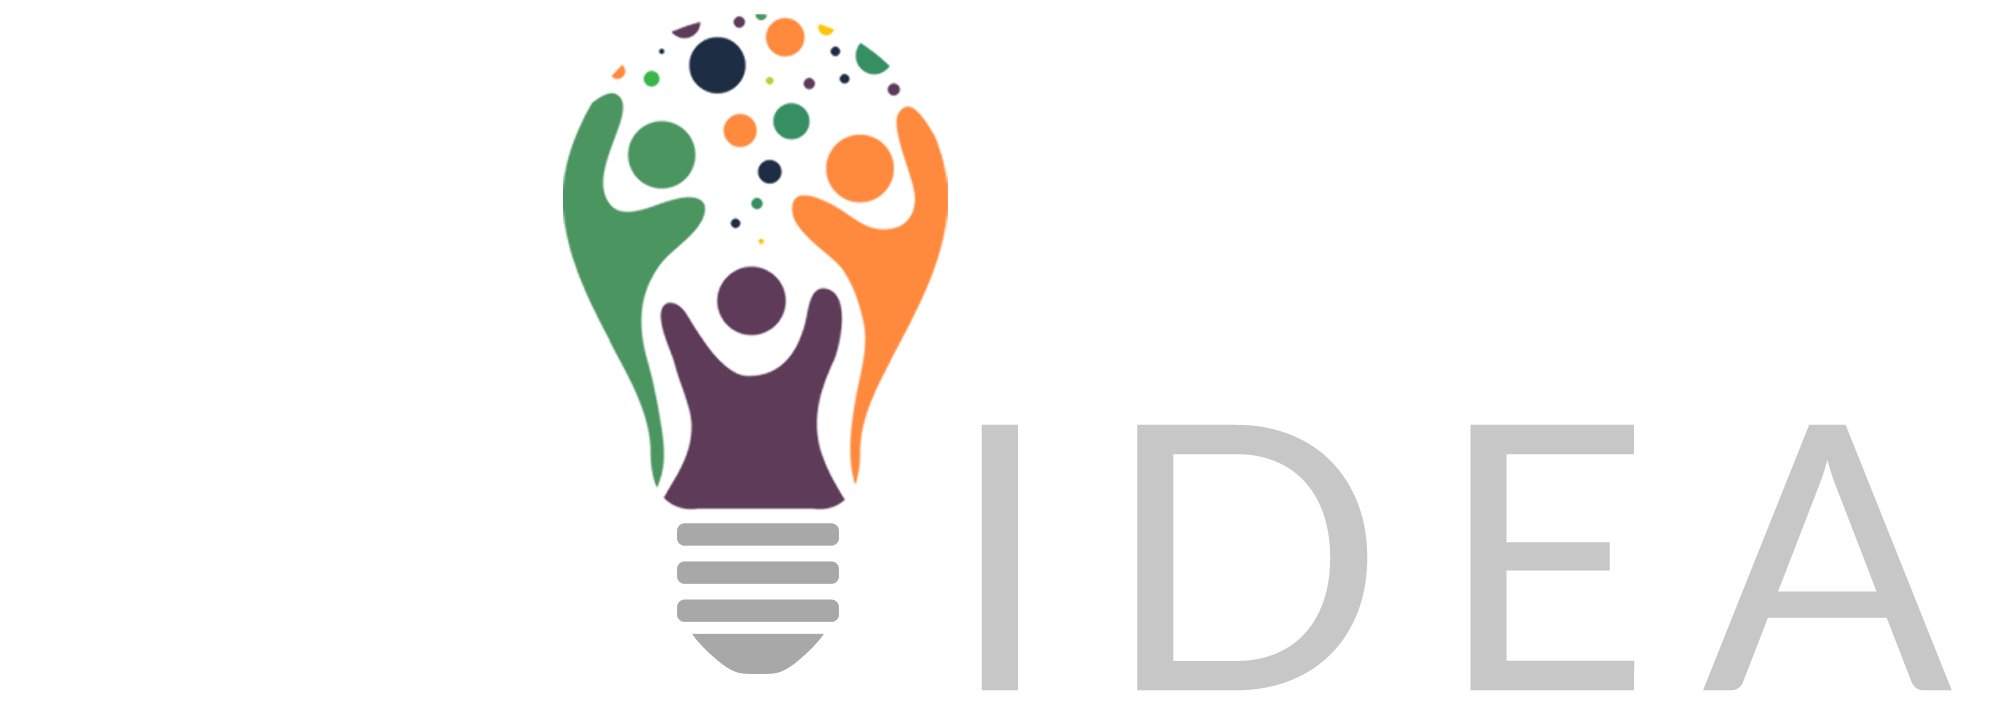 Project Idea Logo in White Text